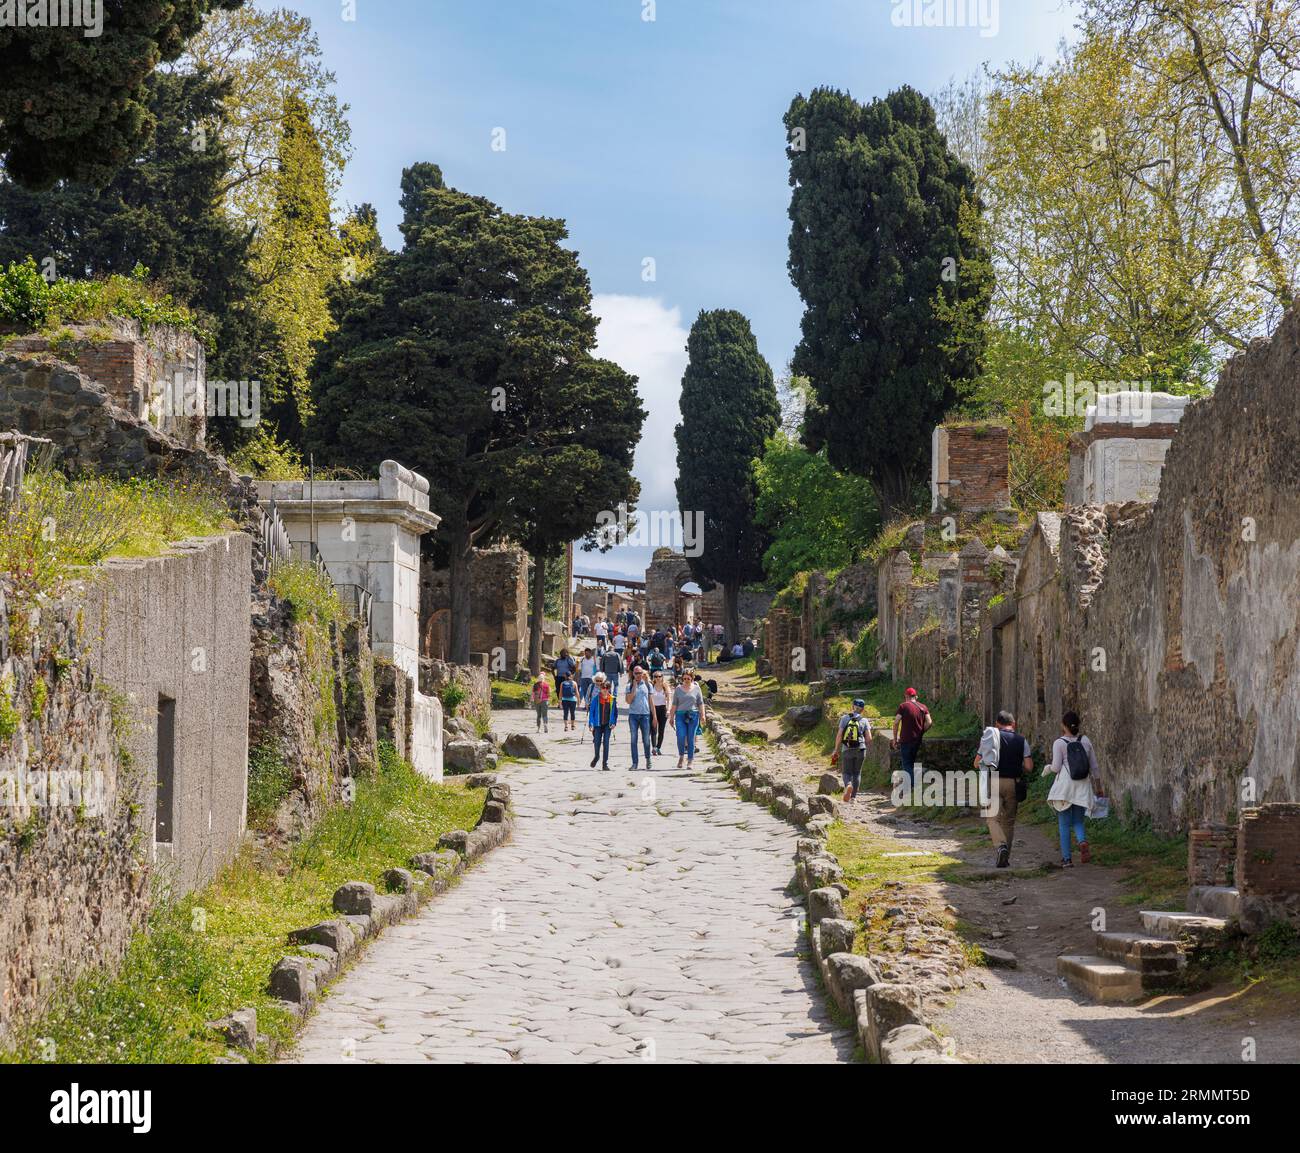 Pompeii Archaeological Site, Campania, Italy.  Street scene with visitors.  Pompeii, Herculaneum, and Torre Annunziata are collectively designated a U Stock Photo